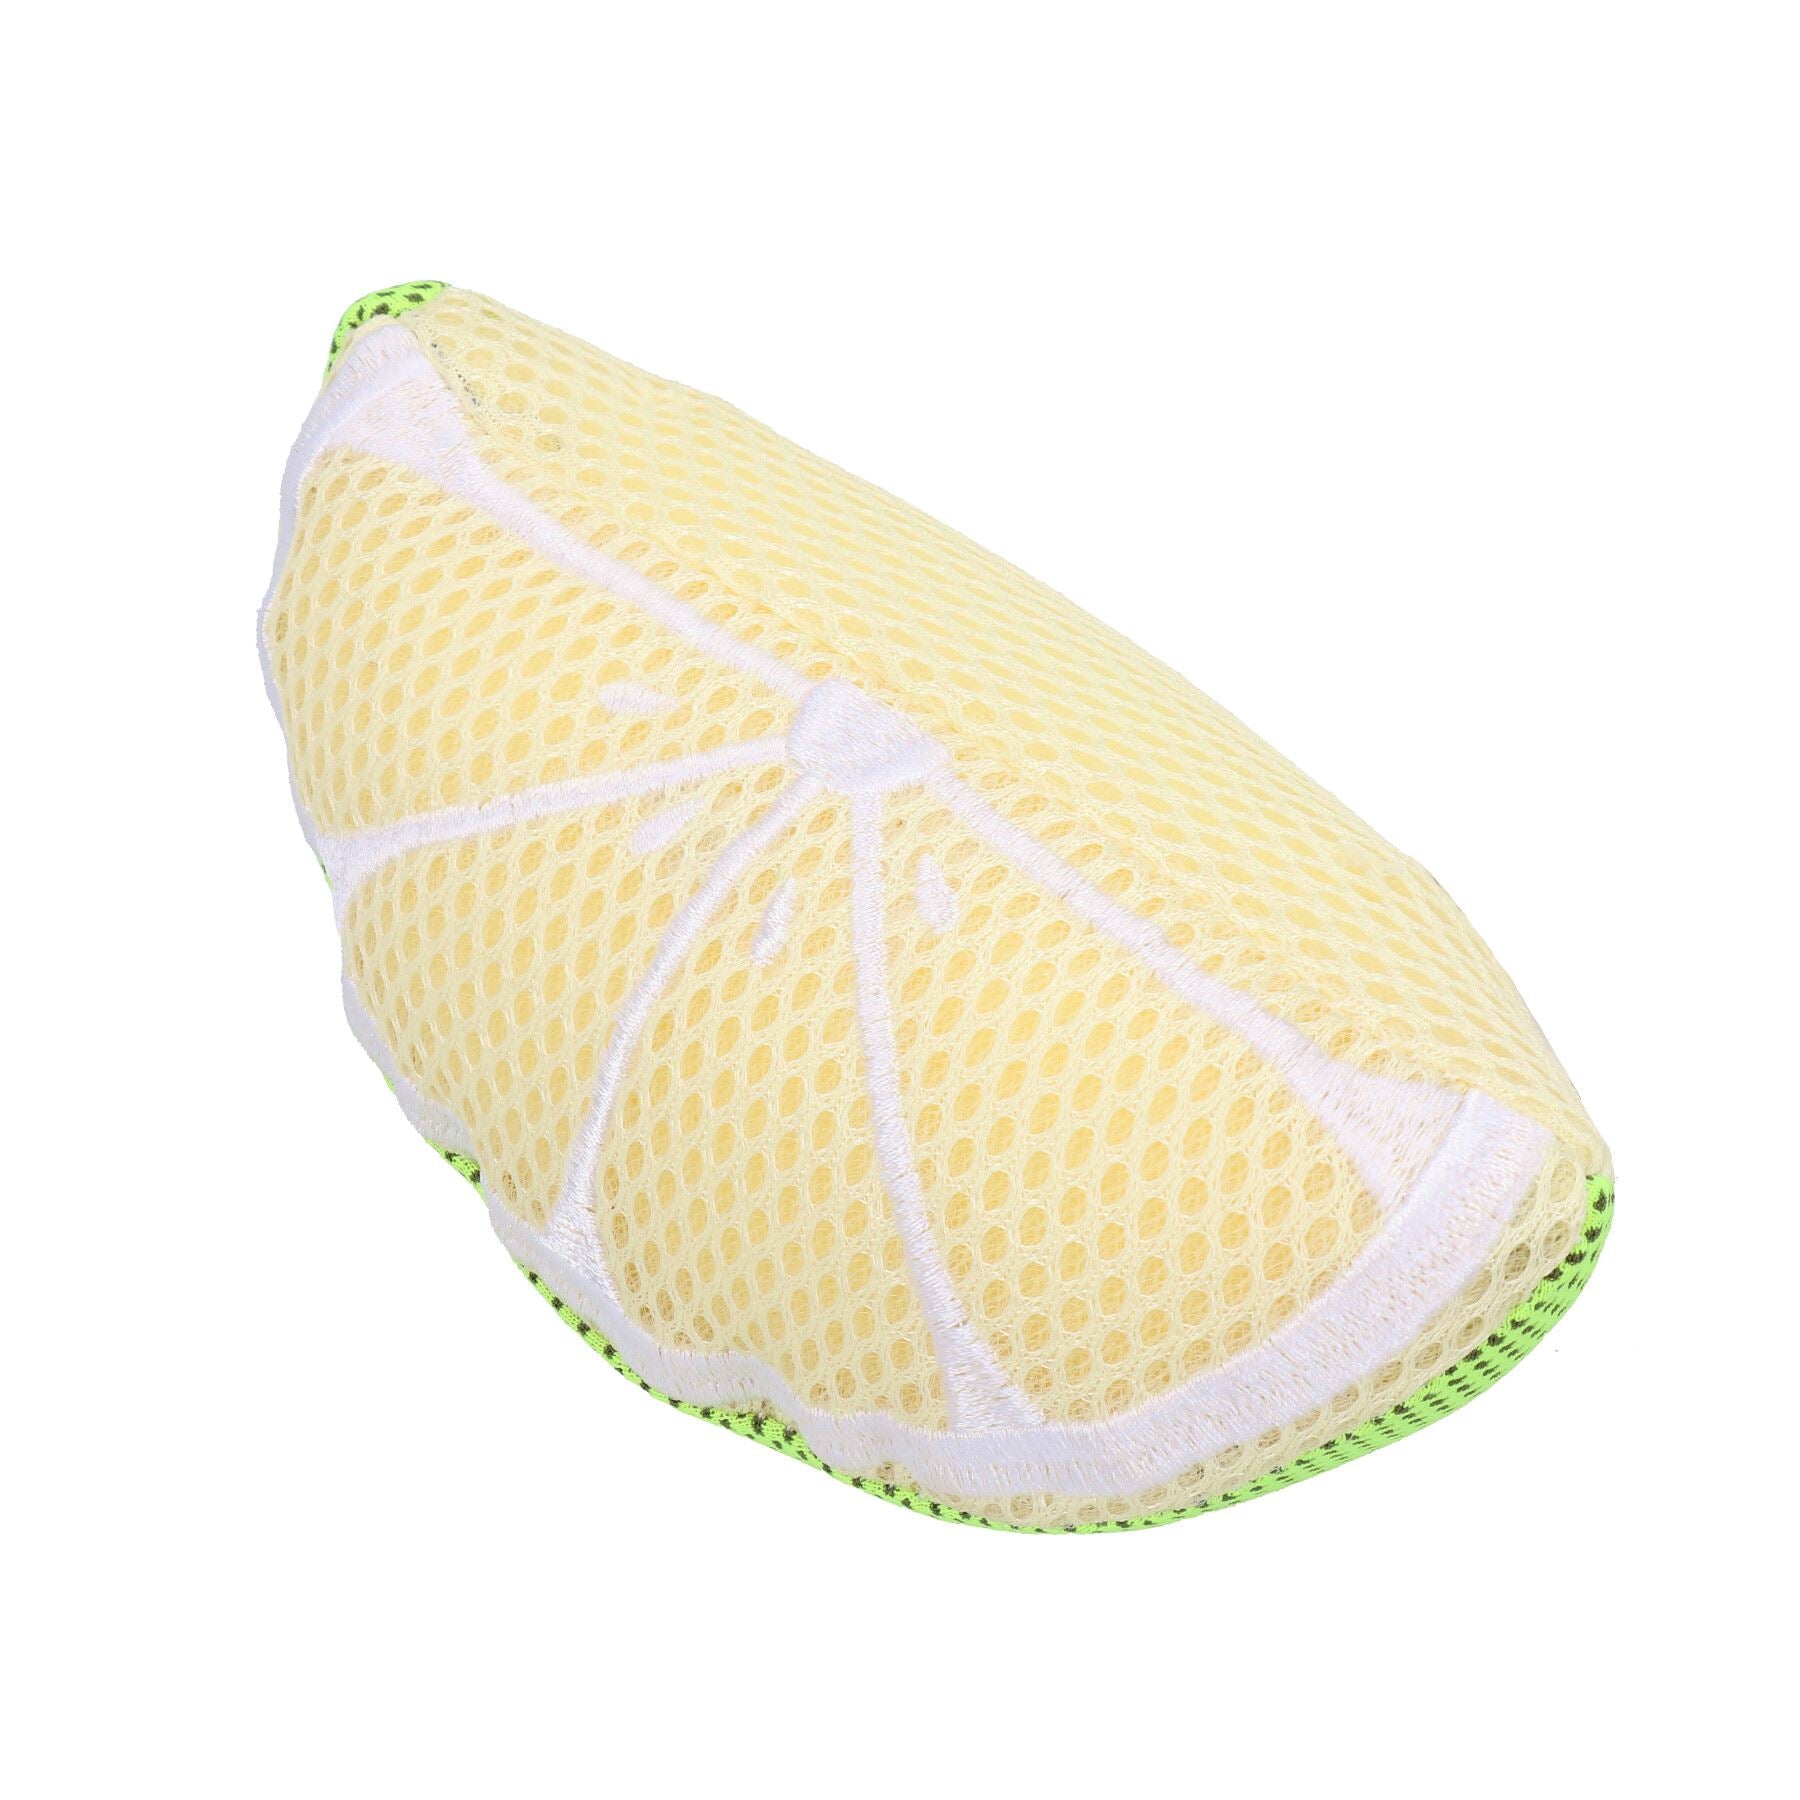 Lemon Ball Chillout Cool Dog Puppy Heat Relief Toy Summer Heat Toy Game